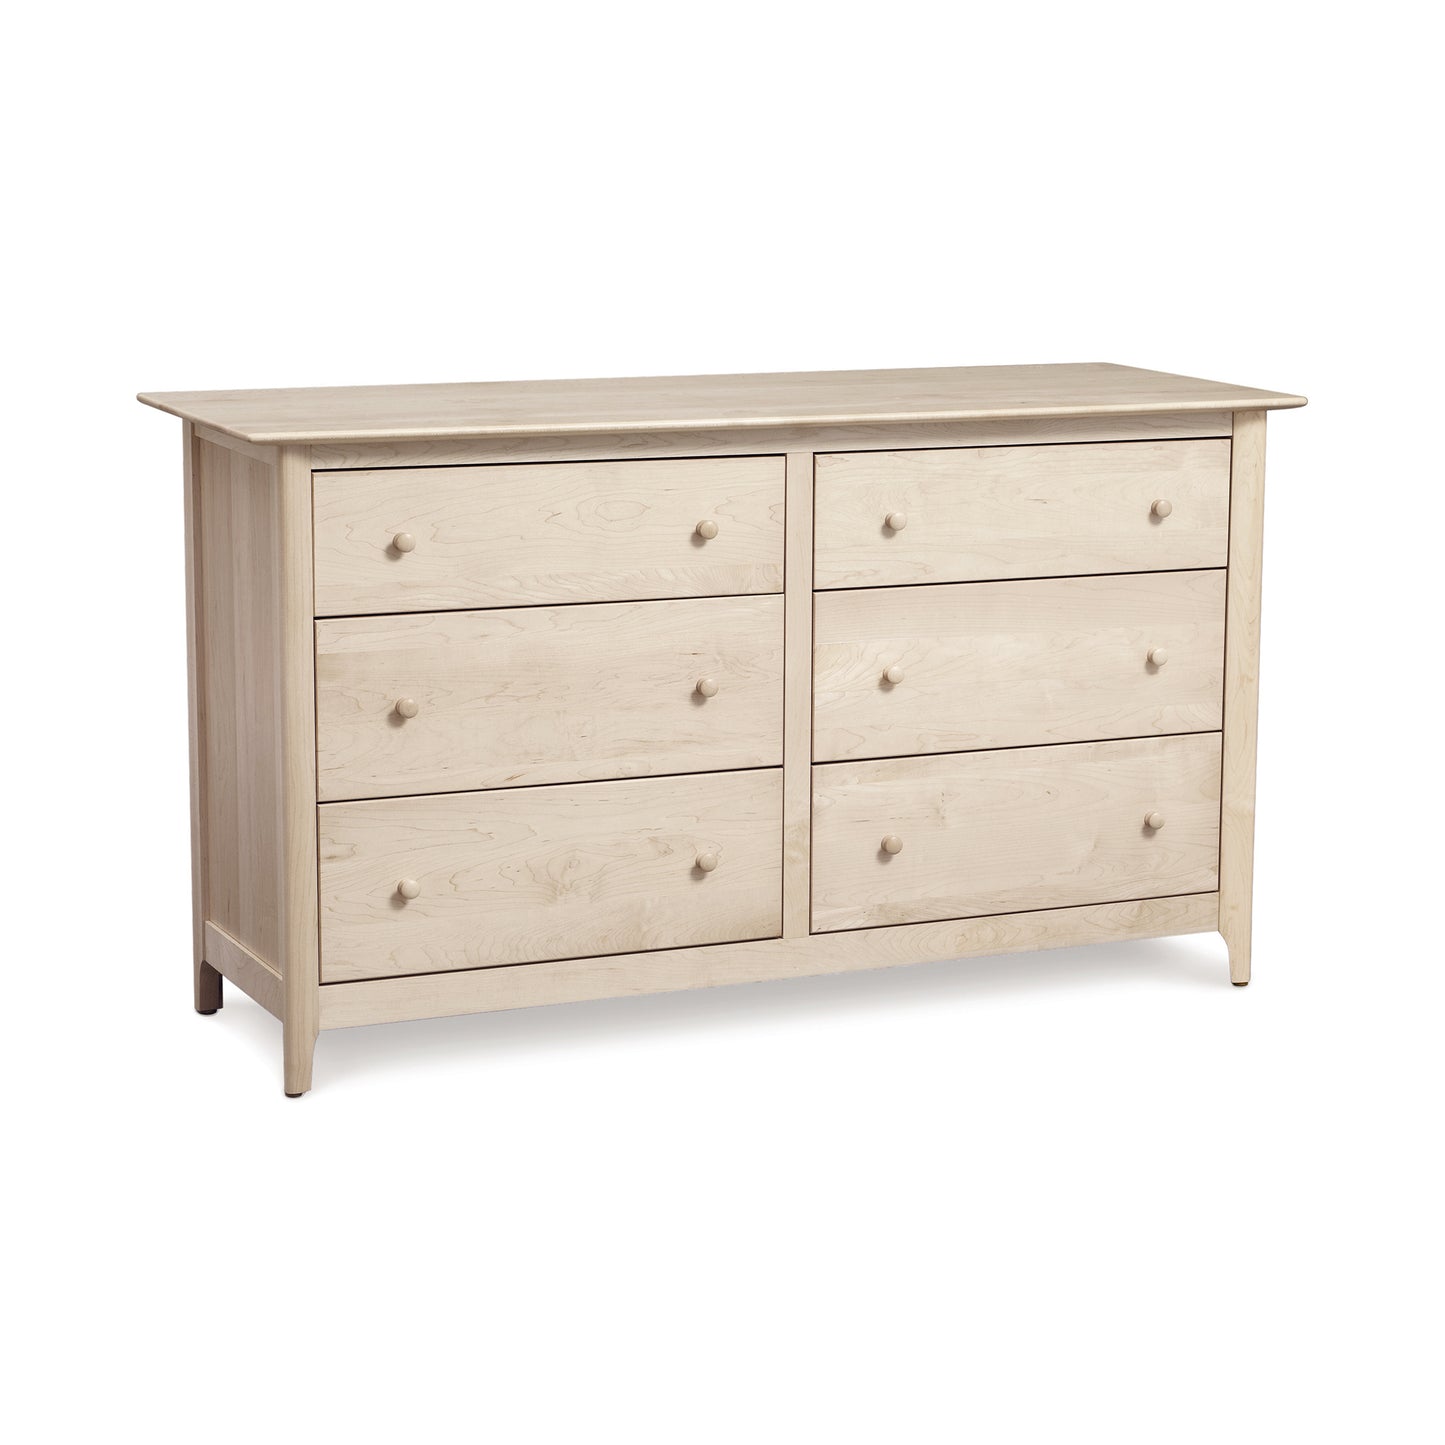 A handmade Sarah 6-Drawer Dresser by Copeland Furniture, featuring an American Shaker design, on a white background.